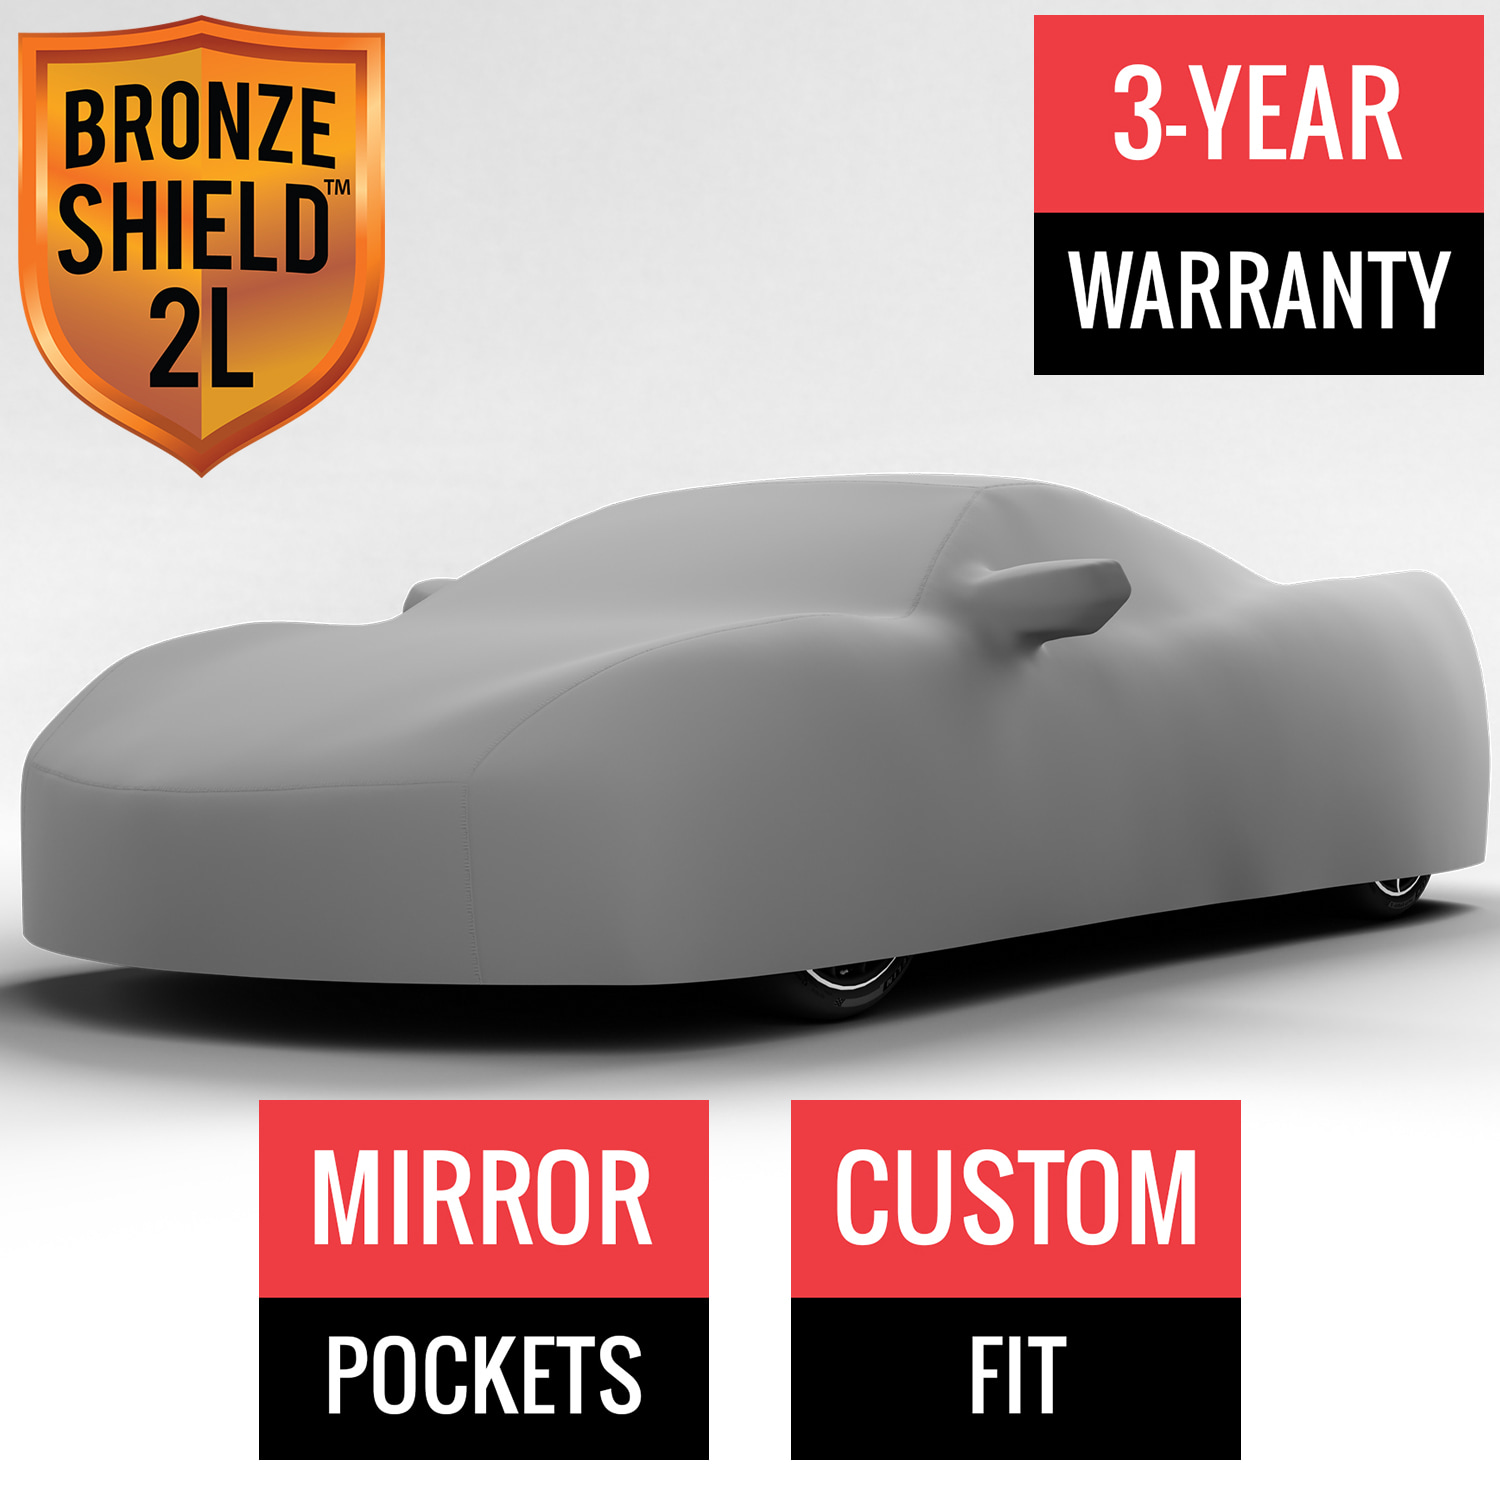 Bronze Shield 2L - Car Cover for Chevrolet Corvette Grand Sport 2022 Convertible 2-Door with HIGH Wing Spoiler